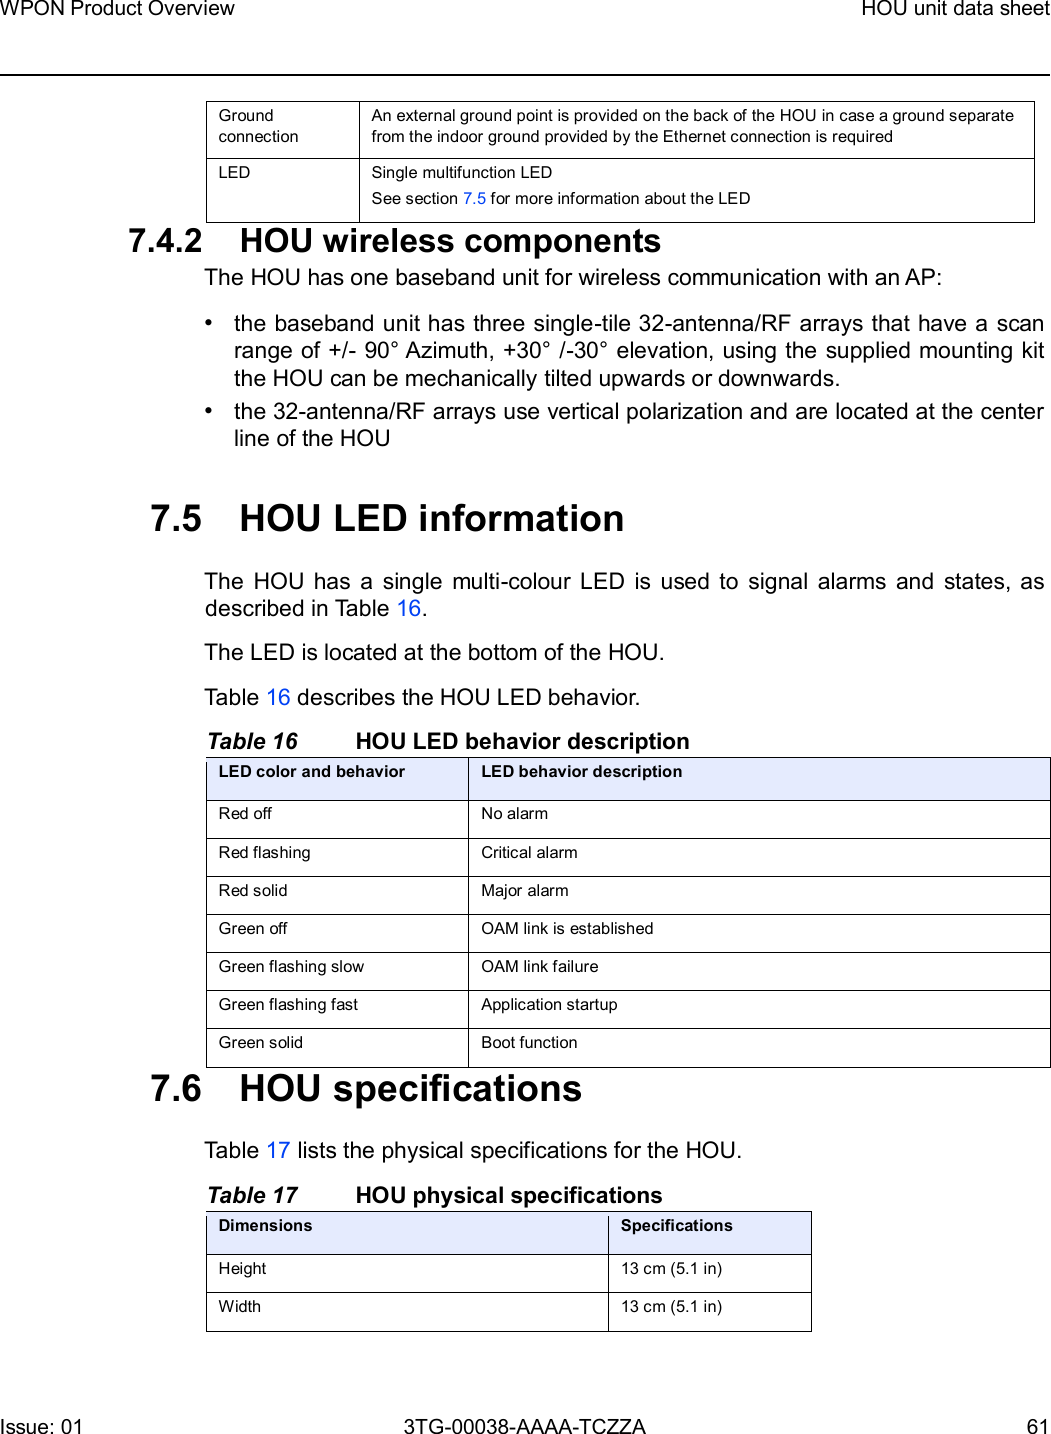 Page 61 of Nokia Bell 7577WPONAPED WPON User Manual WPON Product Overview